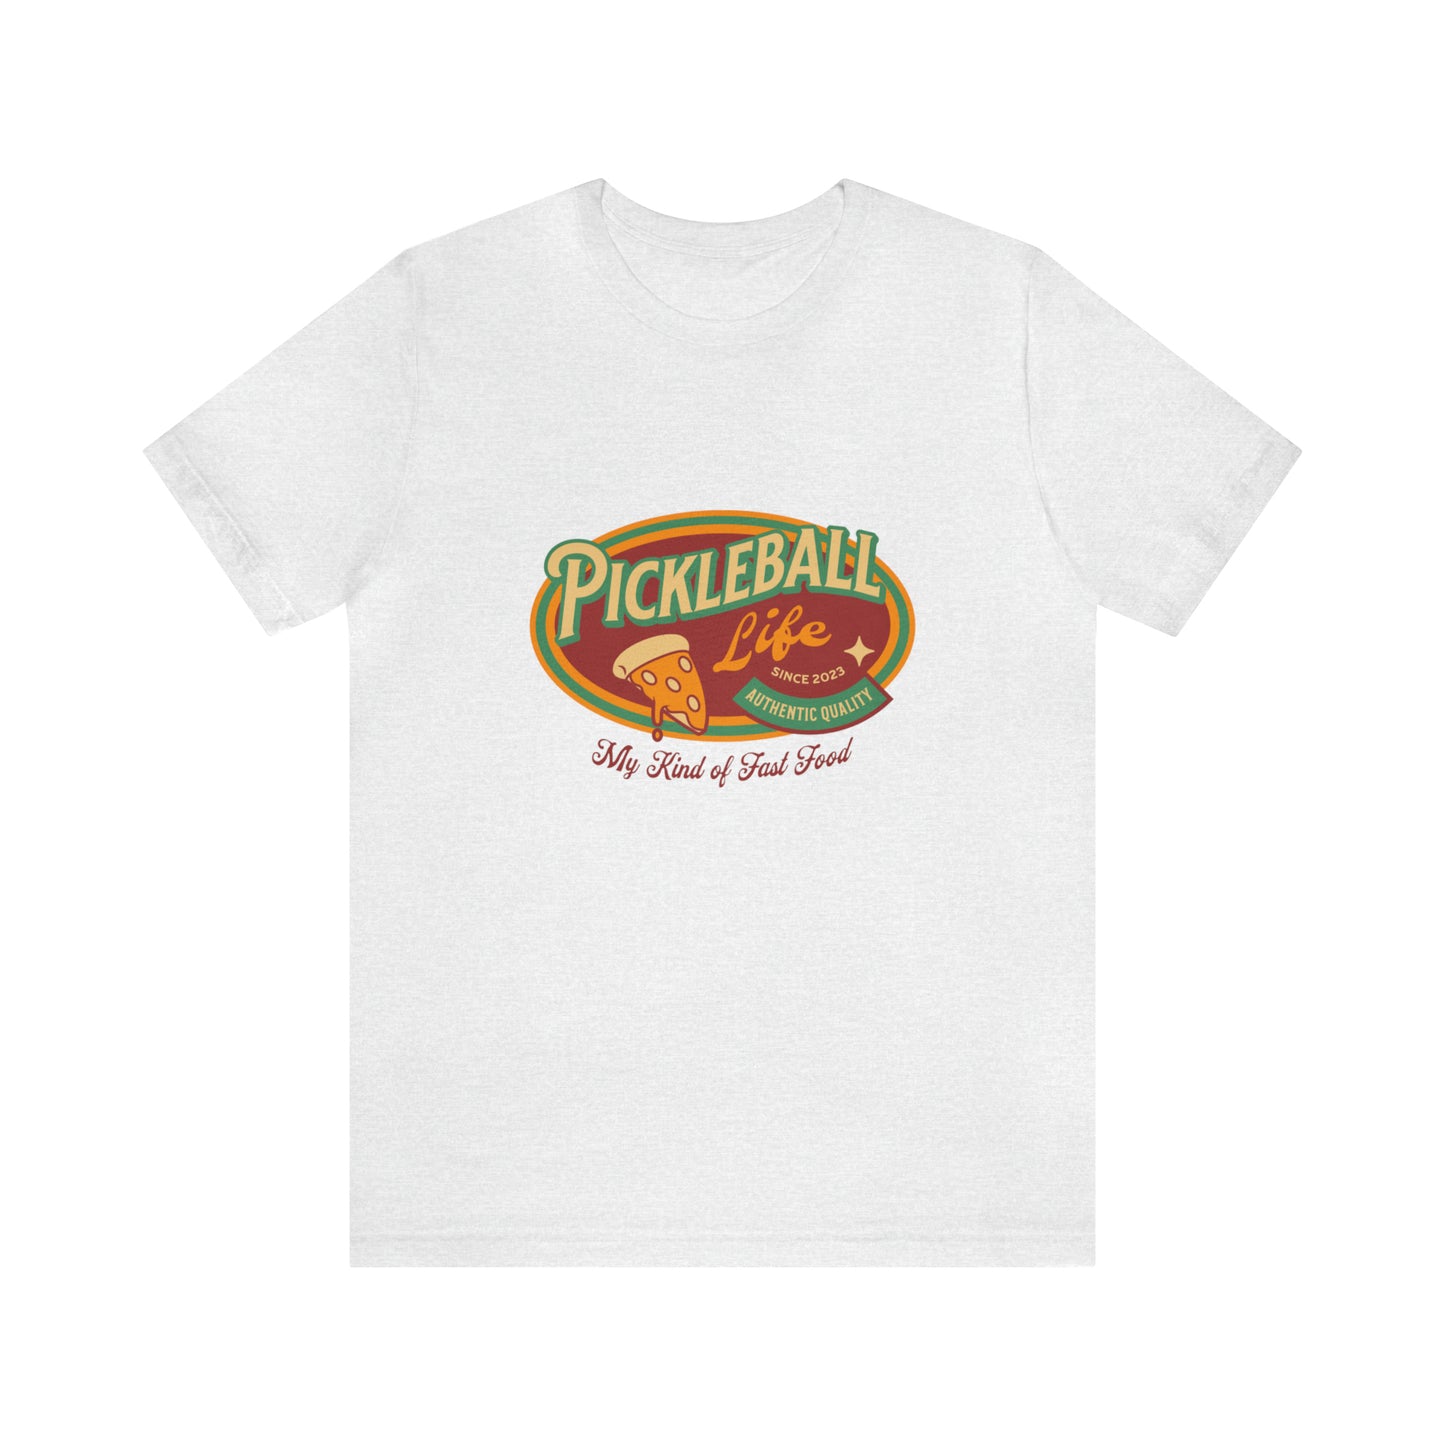 Pickleball: My Kind of Fast Food - Unisex Retro Cotton Tee with Pizza Graphic